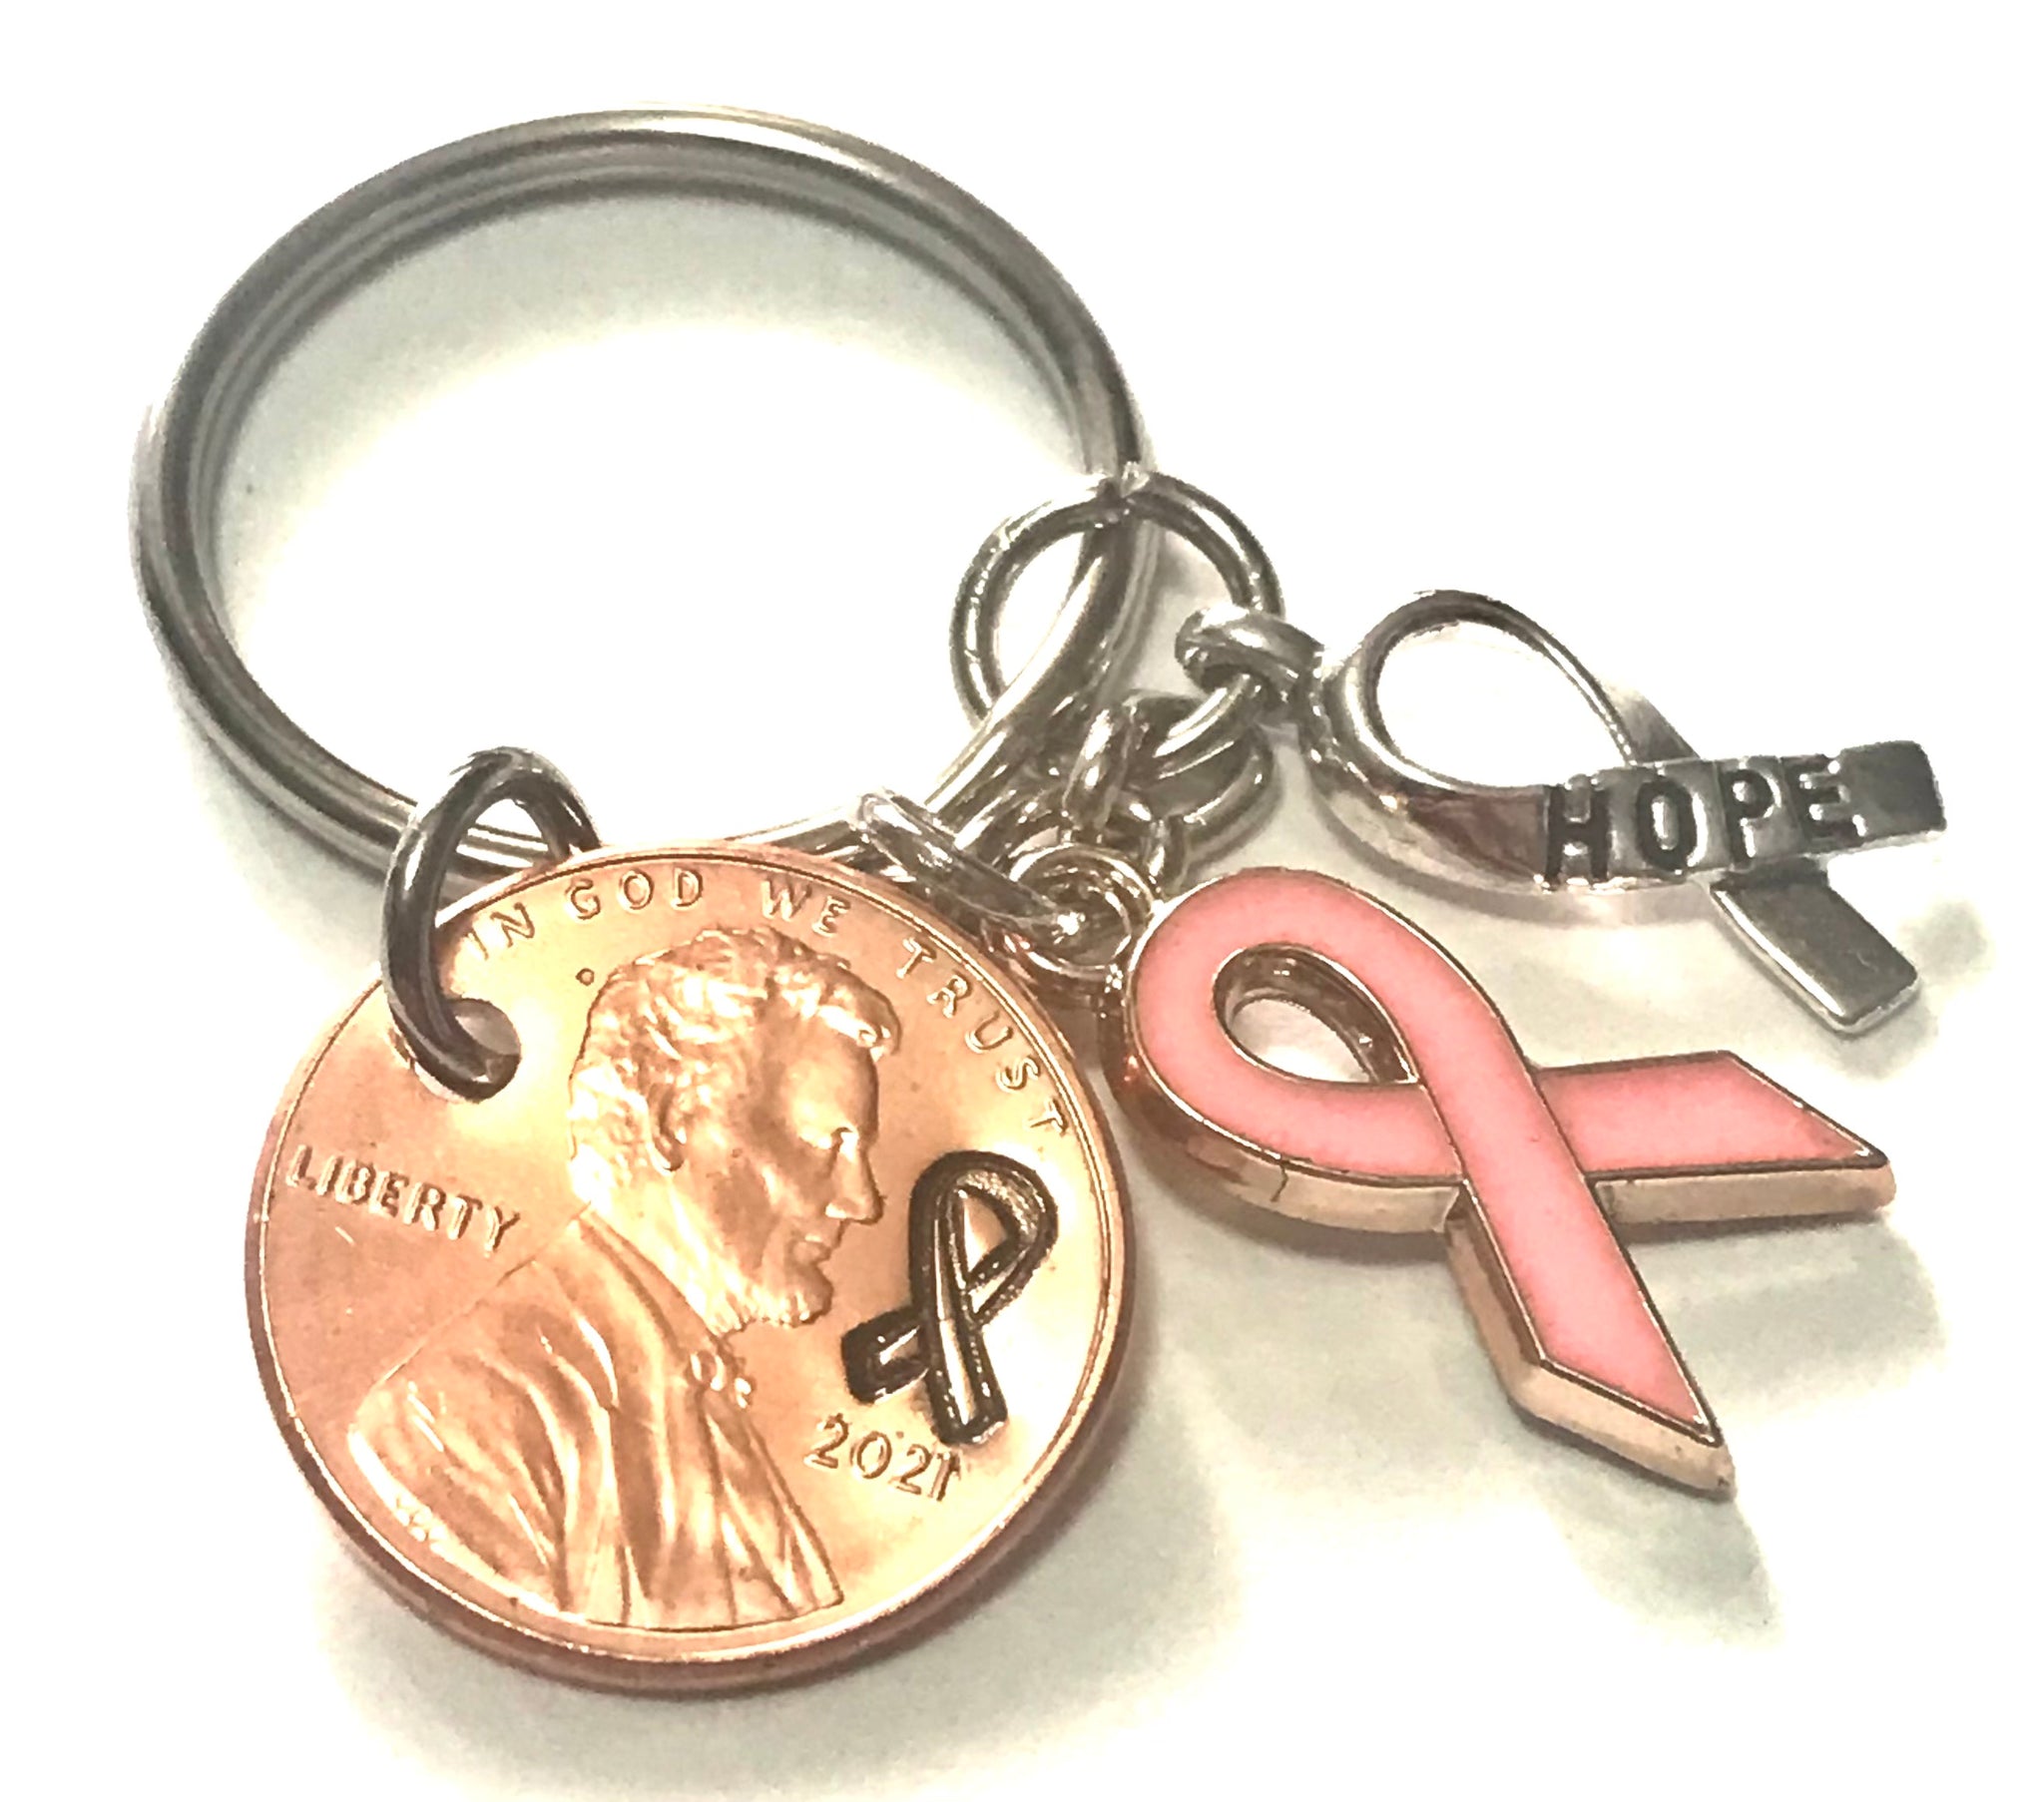 Pink Ribbon and Silver Hope Charm on a Lucky Penny Keychain engraved with a ribbon design in honor of Breast Cancer Awareness.